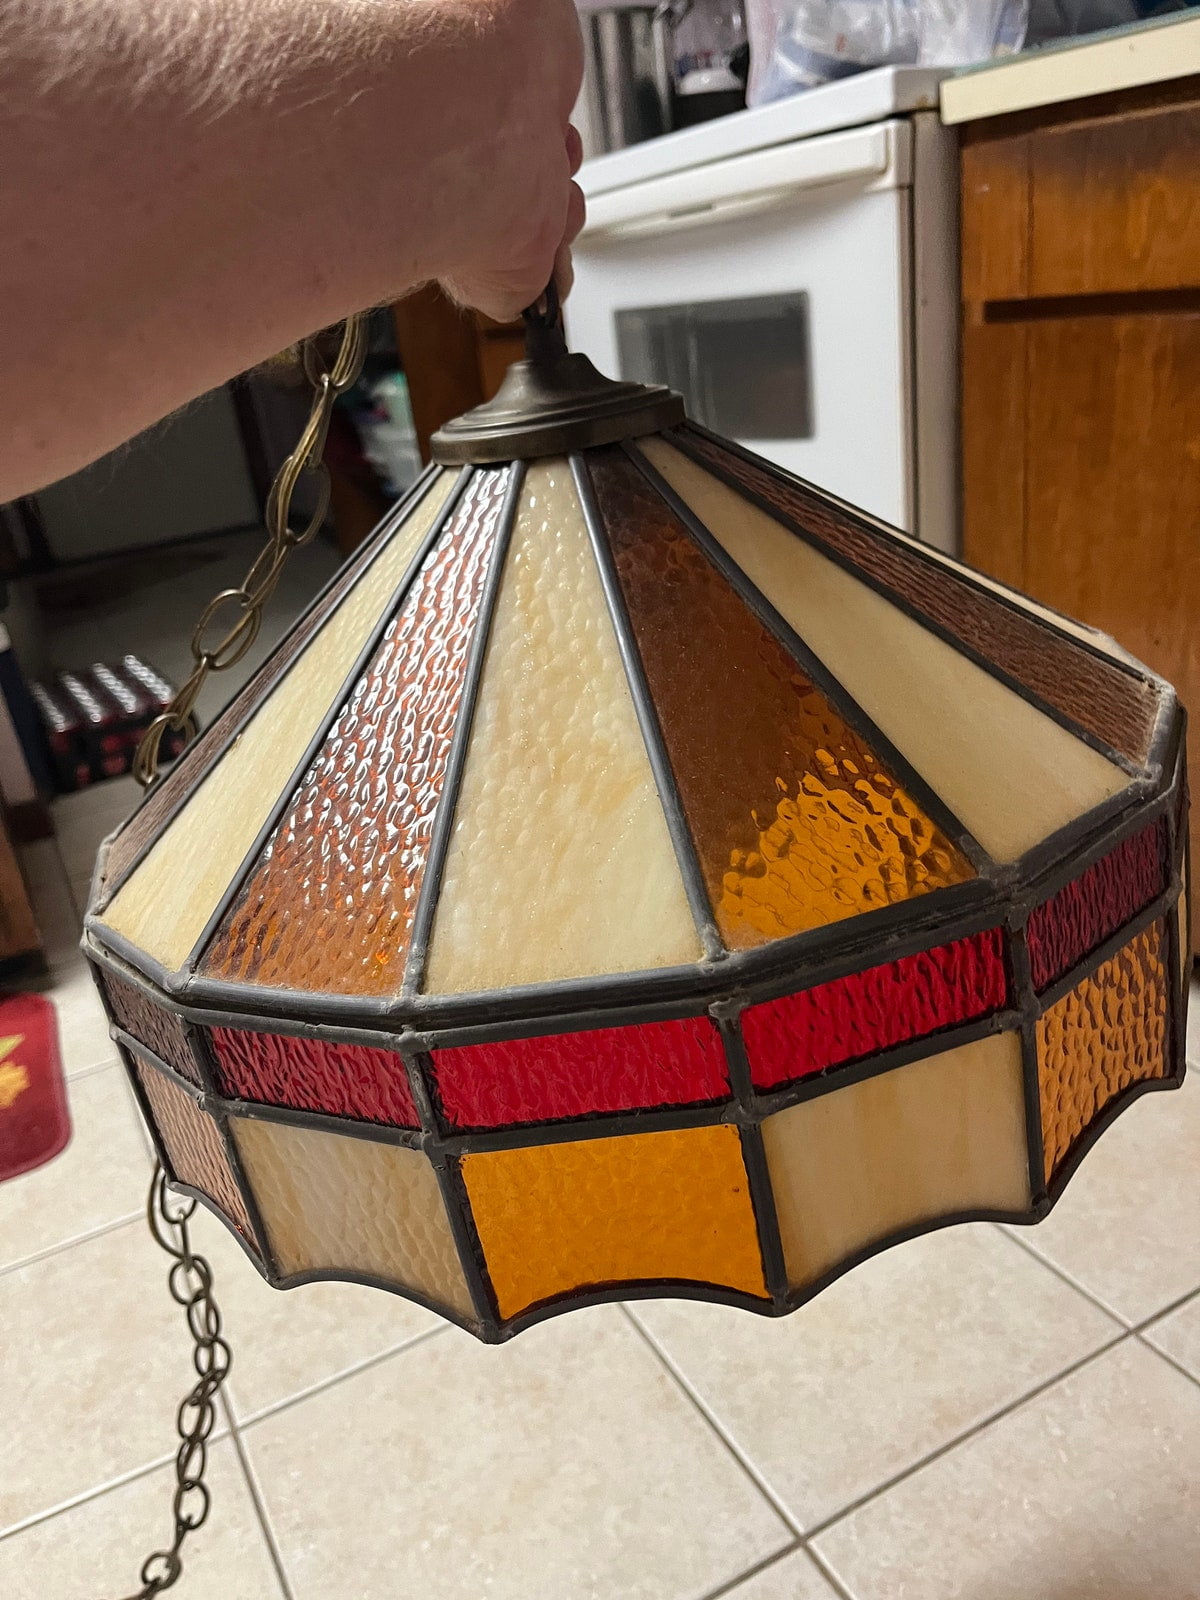 Complete Antique leaded stained glass hanging lamp with 6 foot chain.  Caramel brown red and white swirled with no flaws. 